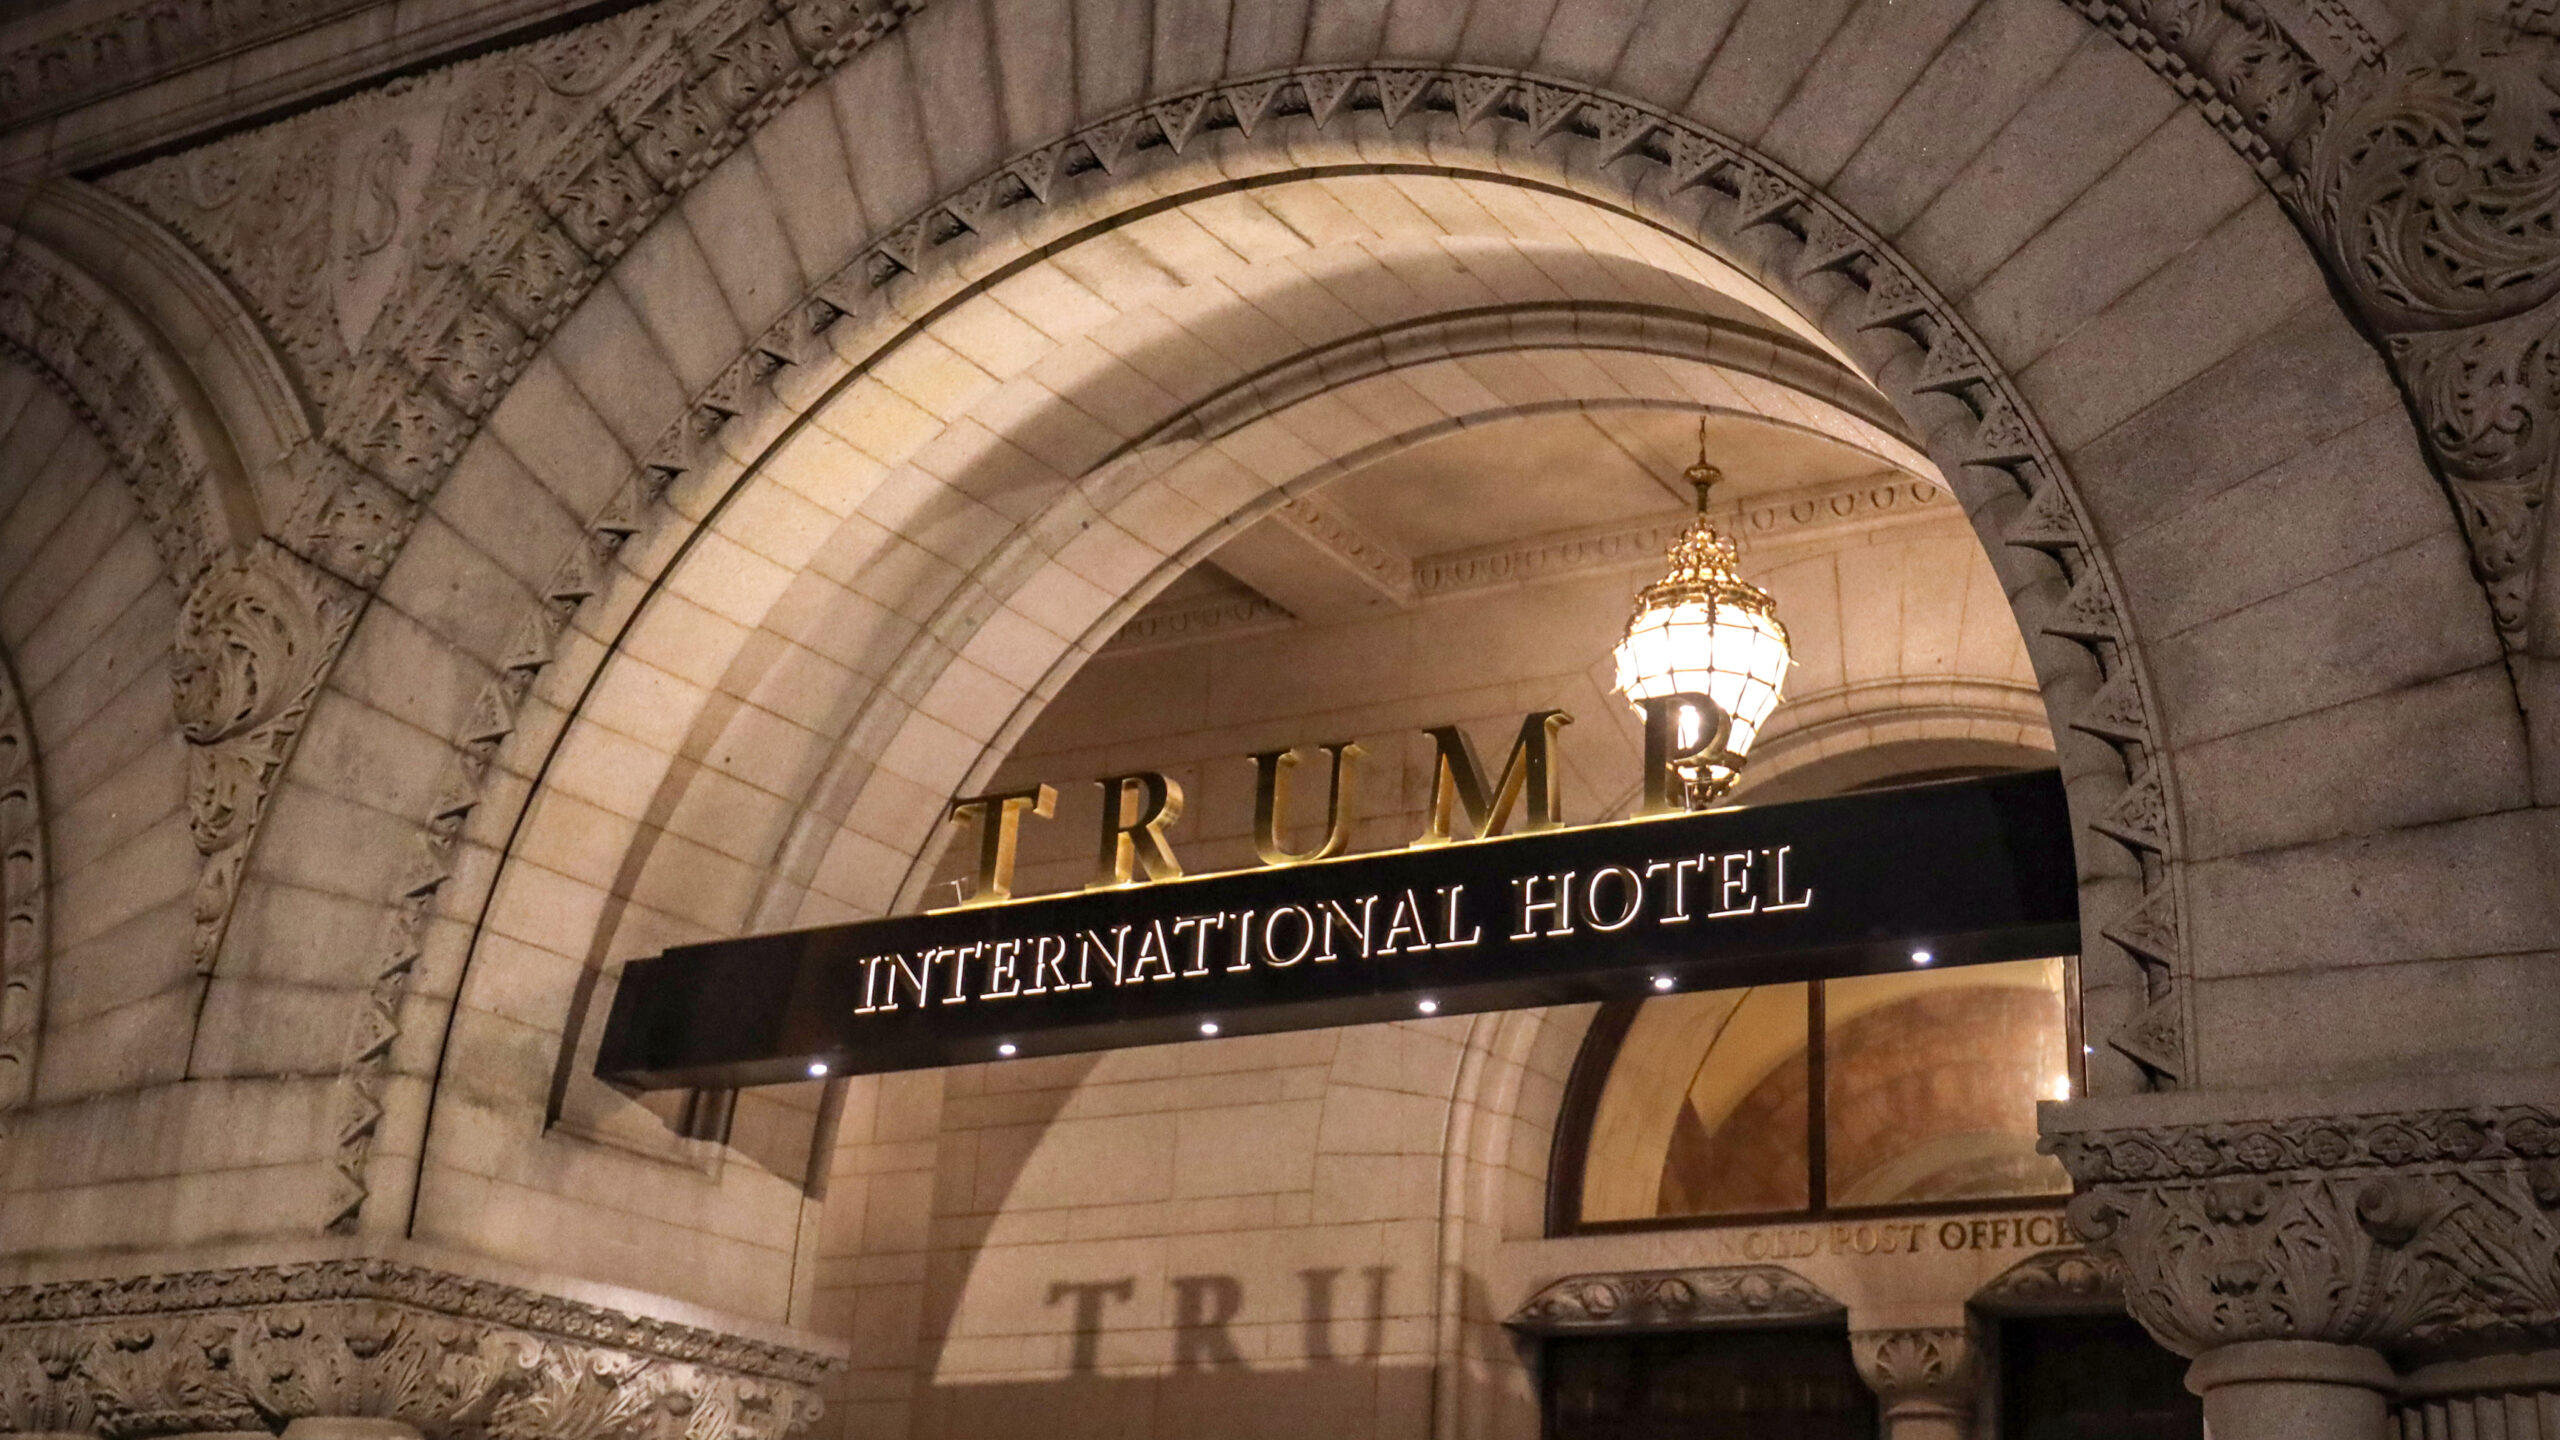 Foreign governments paid millions to Trump’s companies while he was president